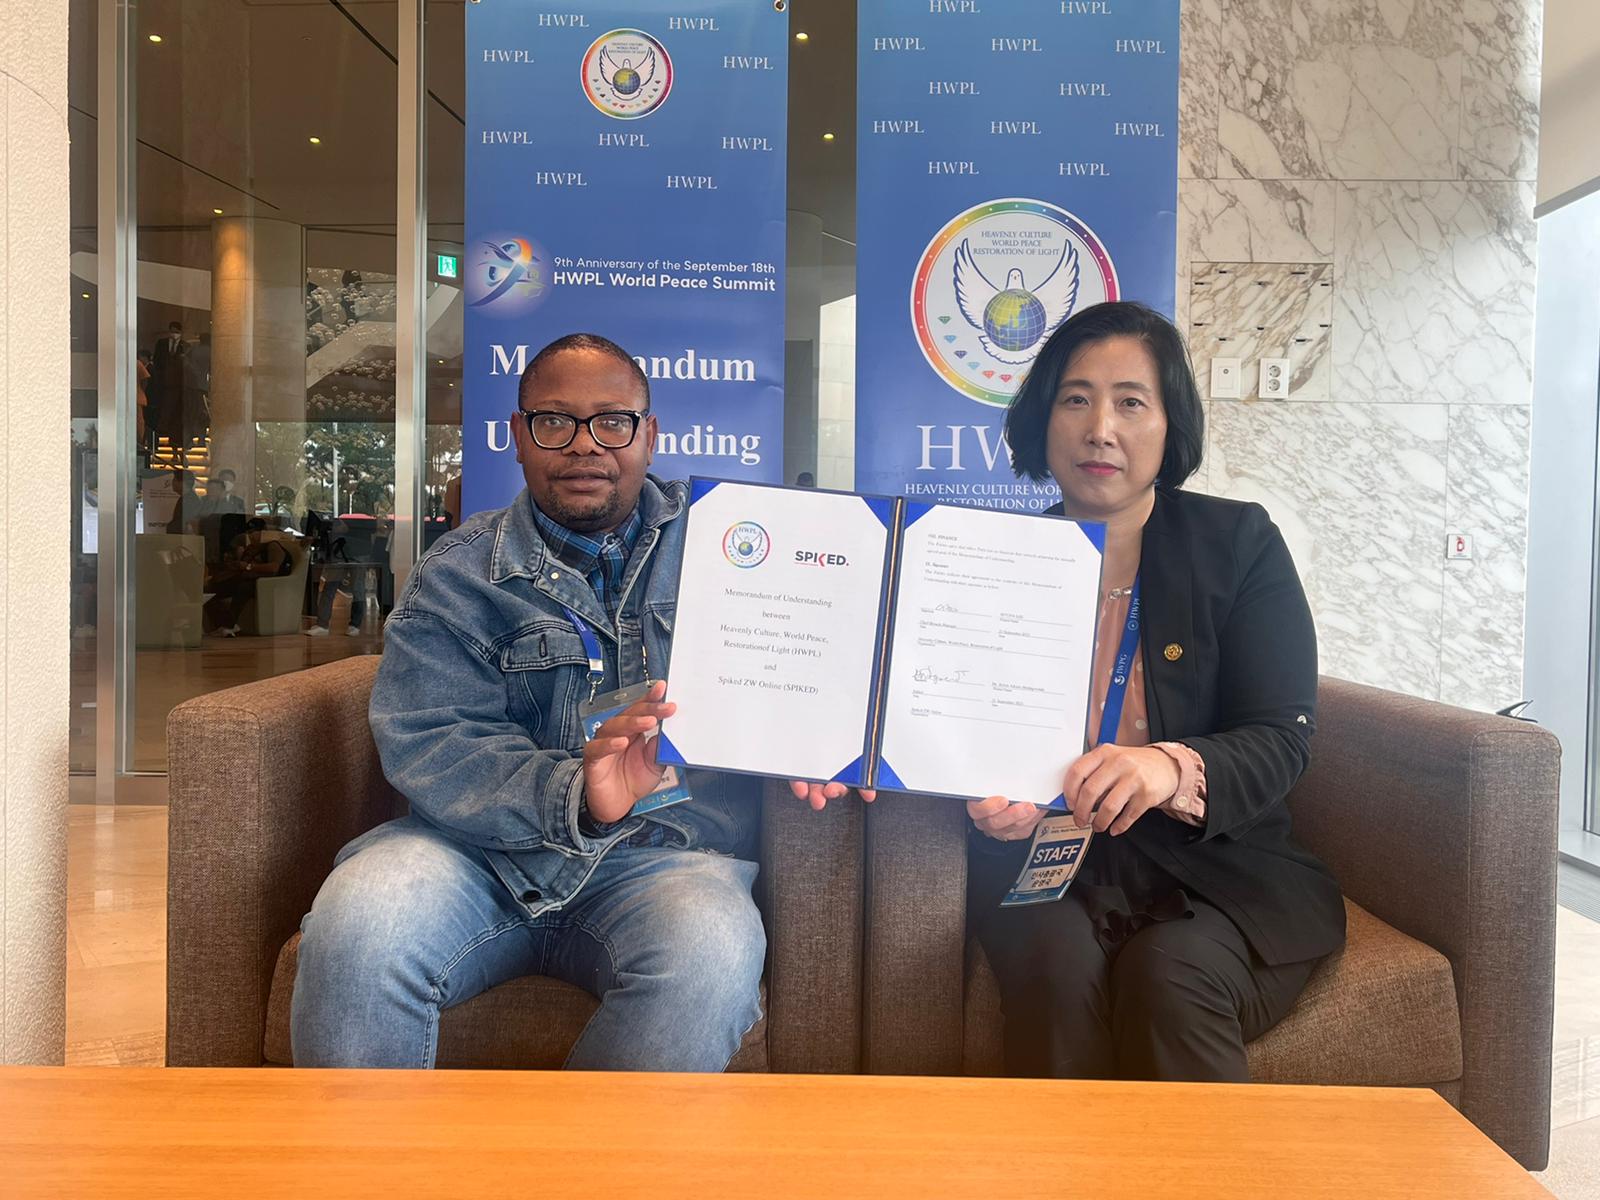 HWPL partners with Spiked Online Media for promotion of peace in the world